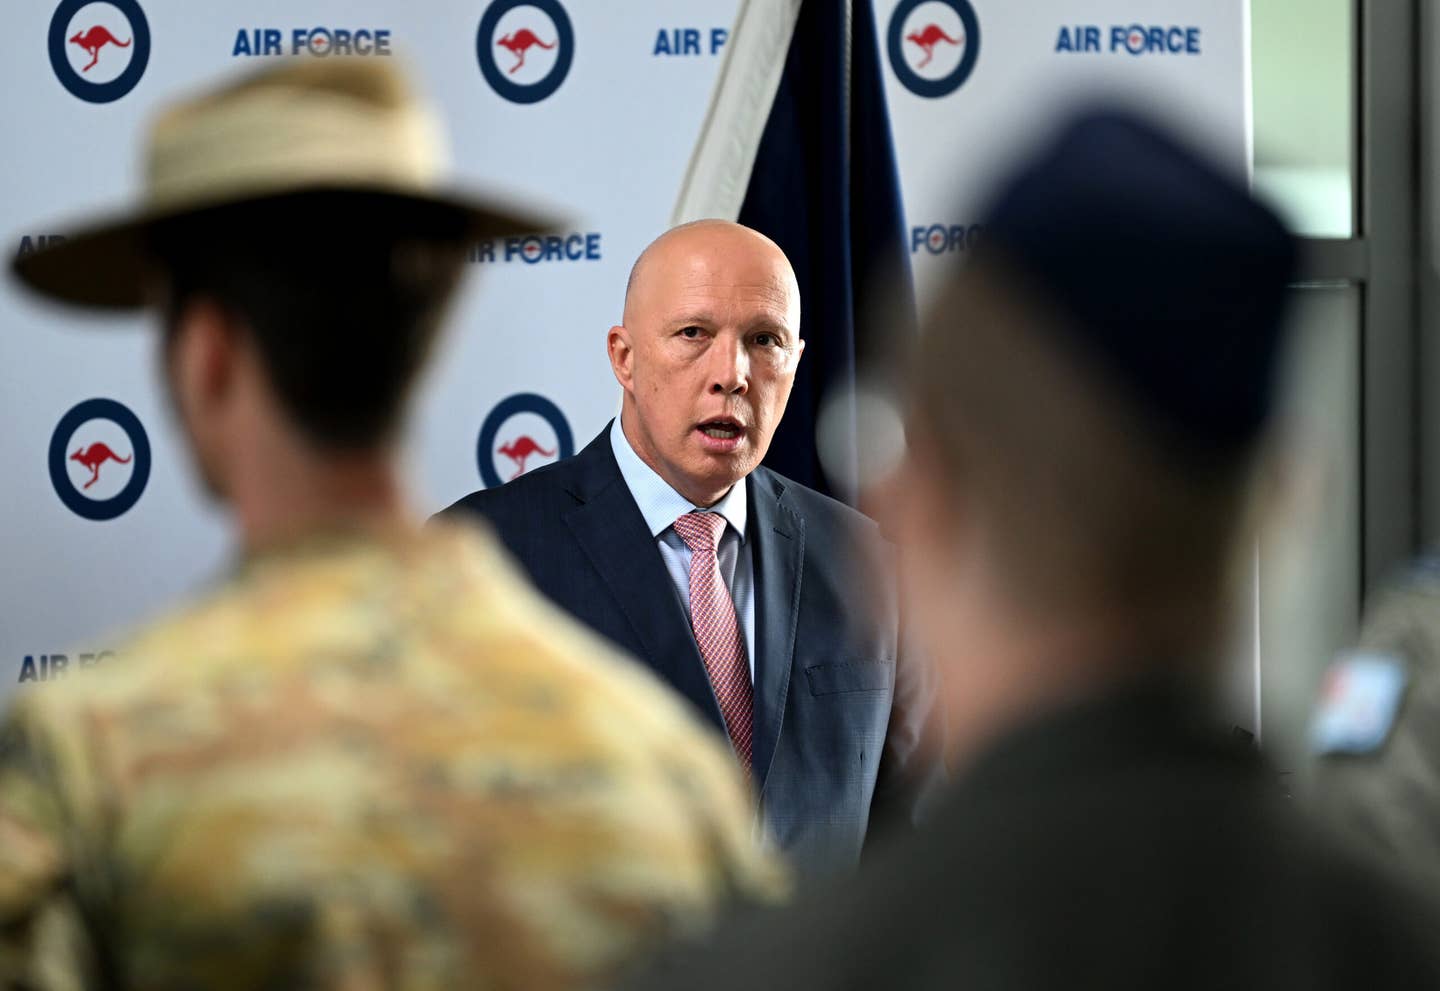 Pictured in April, while still defense minister, Peter Dutton speaks at a medal ceremony at Royal Air Force Base Amberley in Ipswich, Australia. <em>Photo by Dan Peled/Getty Images</em>